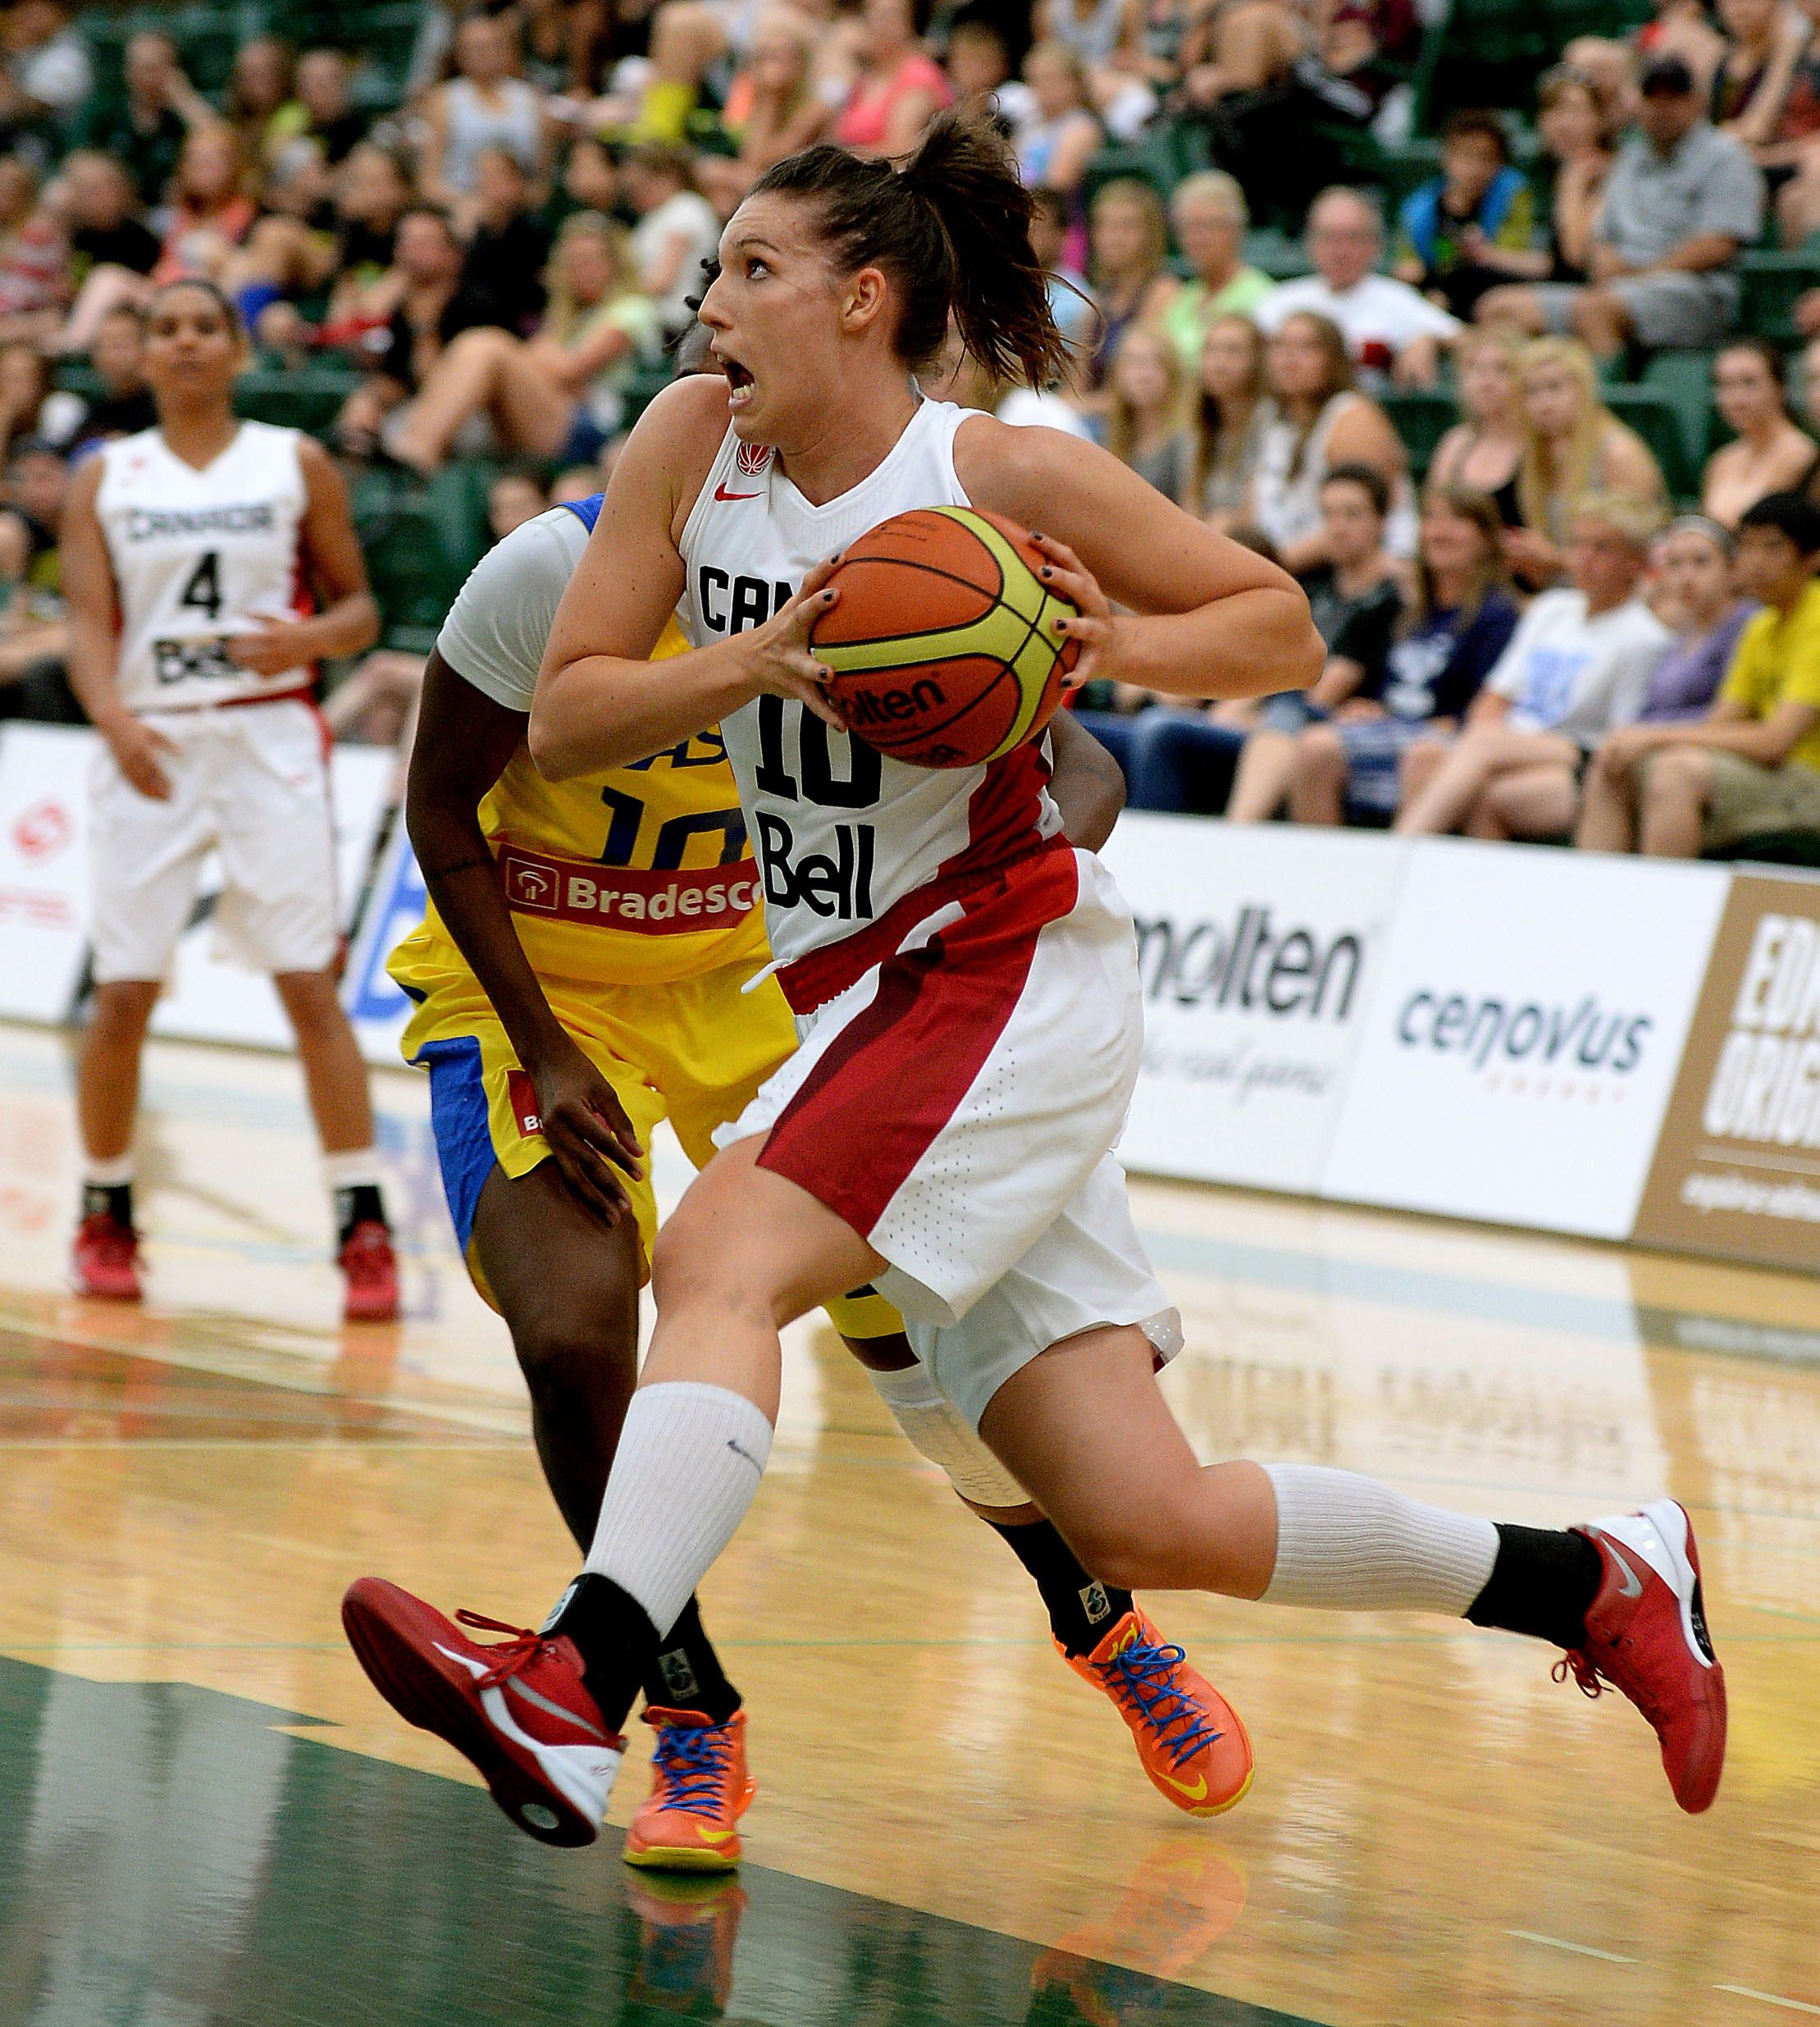 EDMONTON, ALBERTA: JUNE 26, 2014 - Canada's Kendell Ross drives to the net during game action against Brazil in the first game of the inaugural Edmonton Grads International Classic, a three-game series between Canadaâ€™s National Womenâ€™s Basketball Team, ninth ranked team in the world, and Brazilâ€™s National Women's Basketball Team, seventh-ranked team in the world. The three-game series is being played at the Saville Community Sports Centre on June 26, 27 and 28, 2014. The event will be the first time Edmontonians will see the national team in competition since they relocated to Edmonton last spring. (PHOTO BY LARRY WONG/EDMONTON JOURNAL)